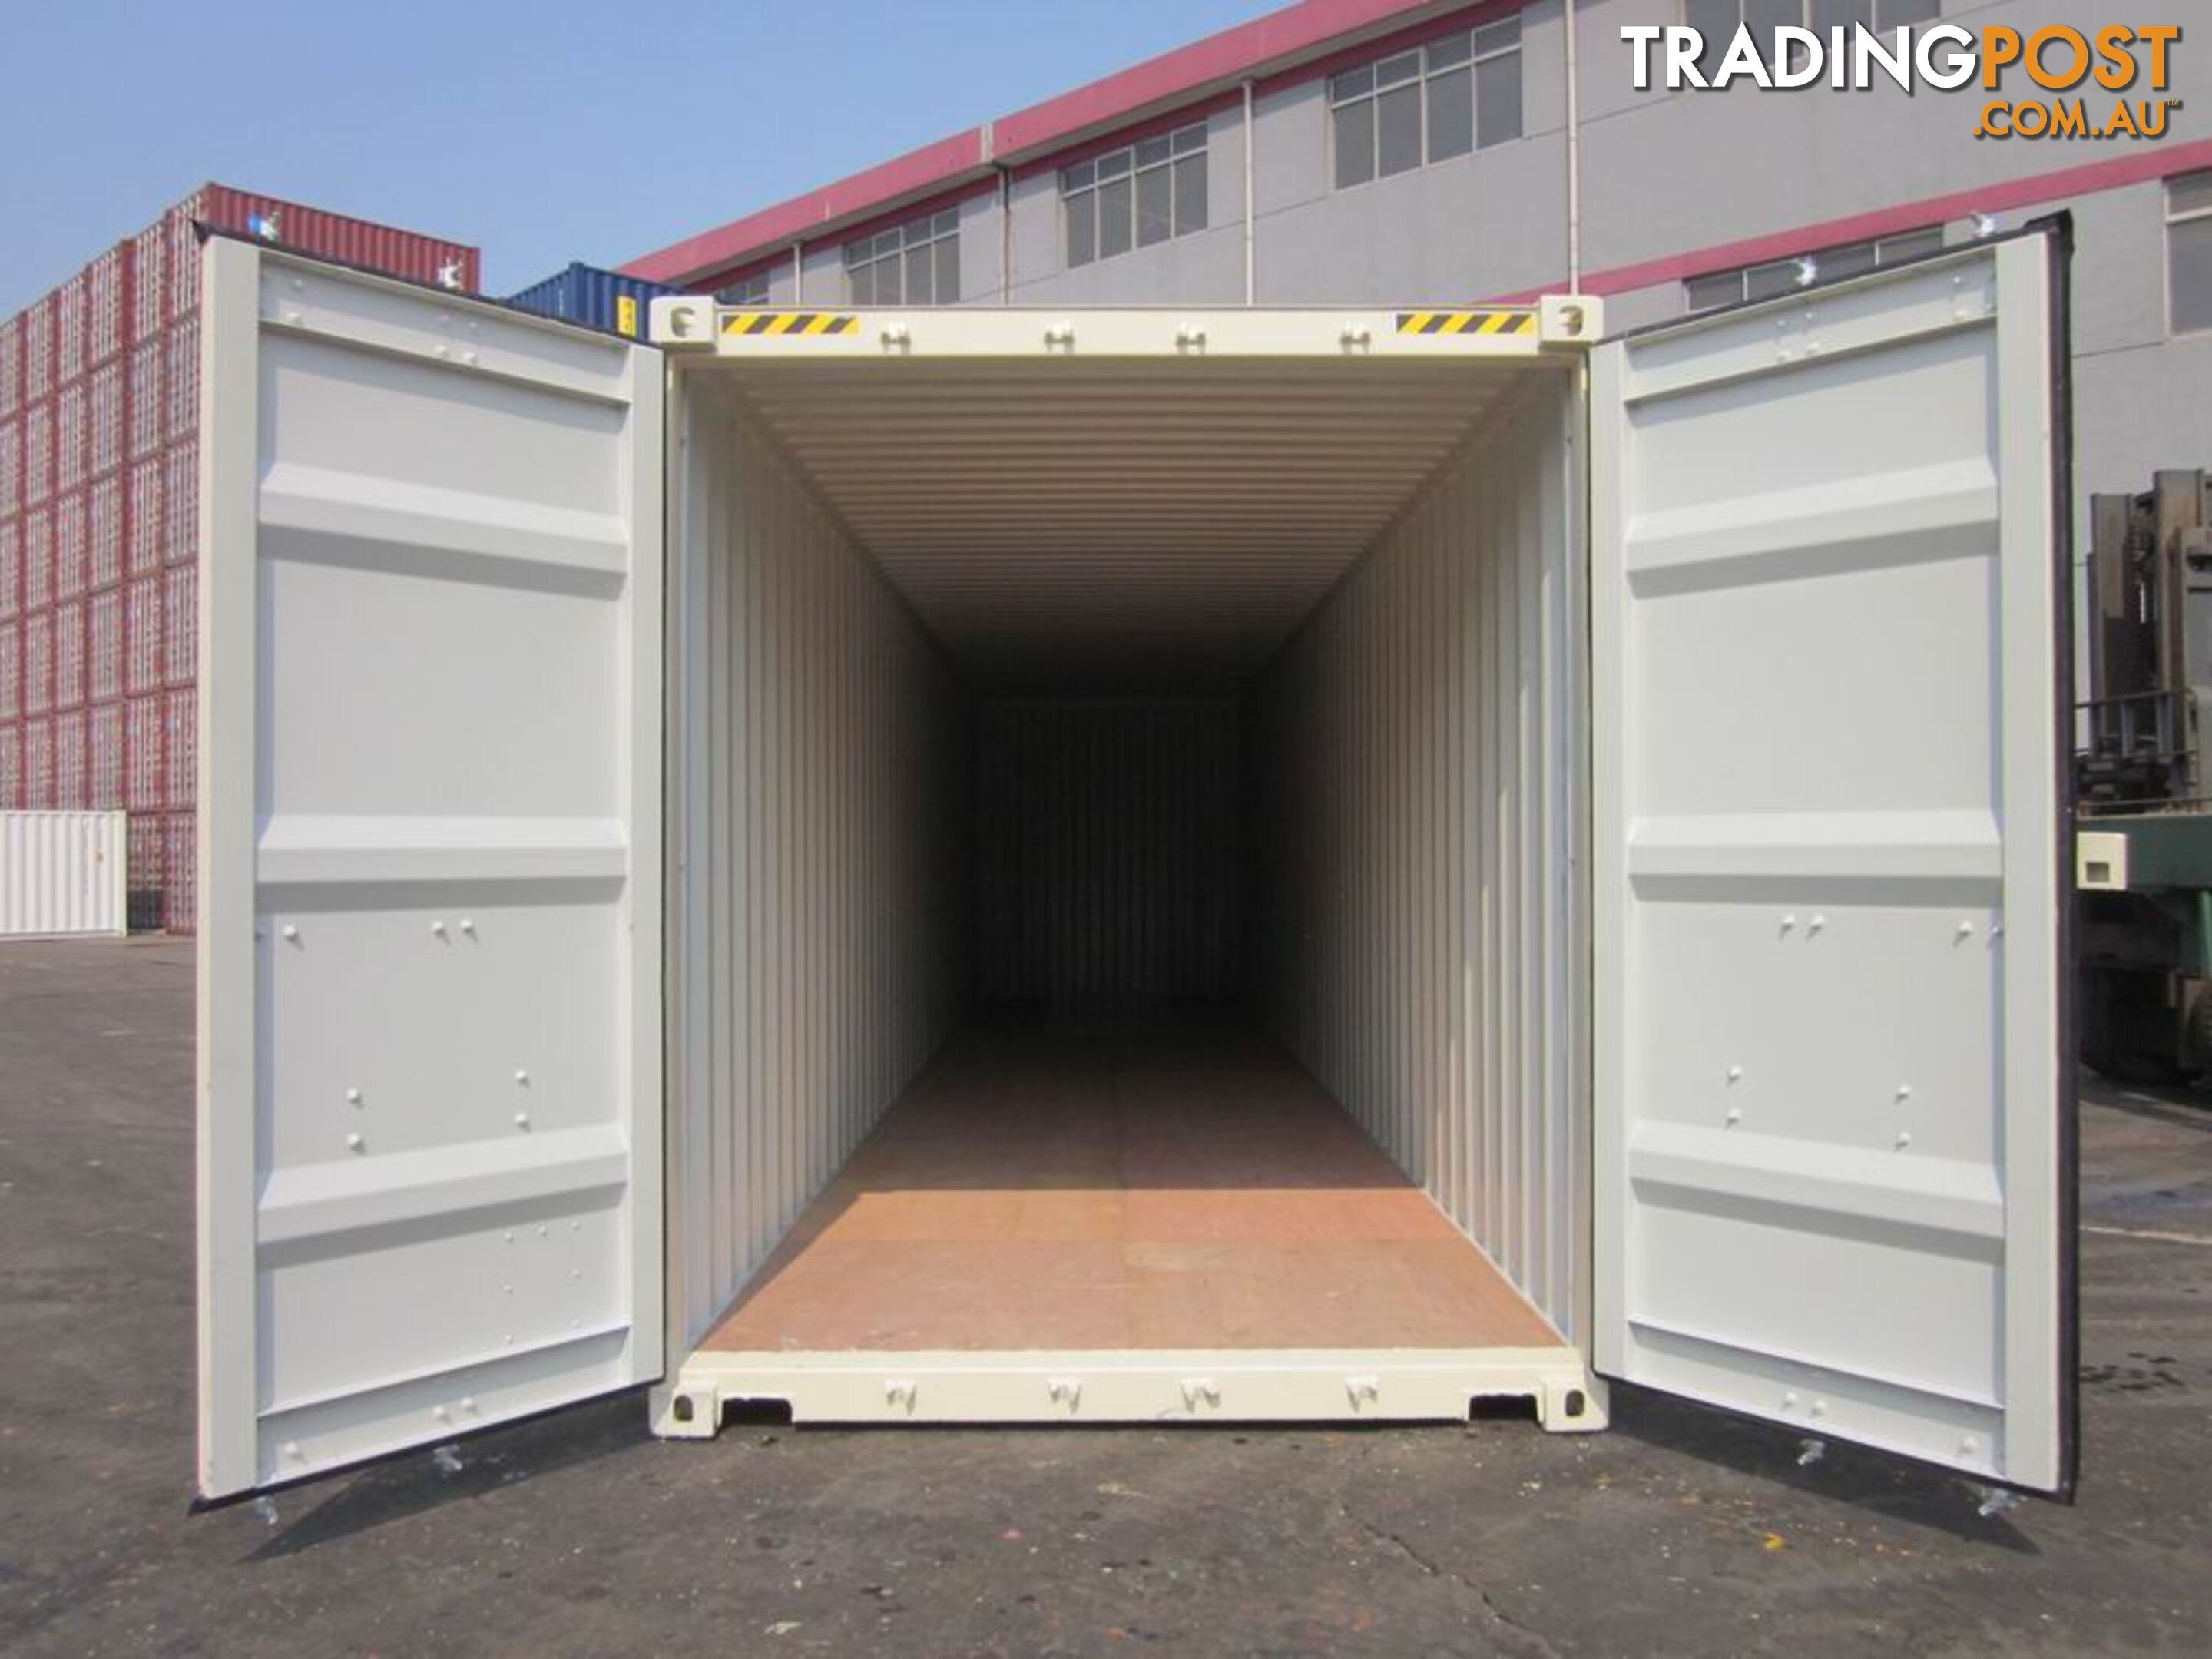 New 40ft High Cube Shipping Containers Williamtown - From $7950 + GST